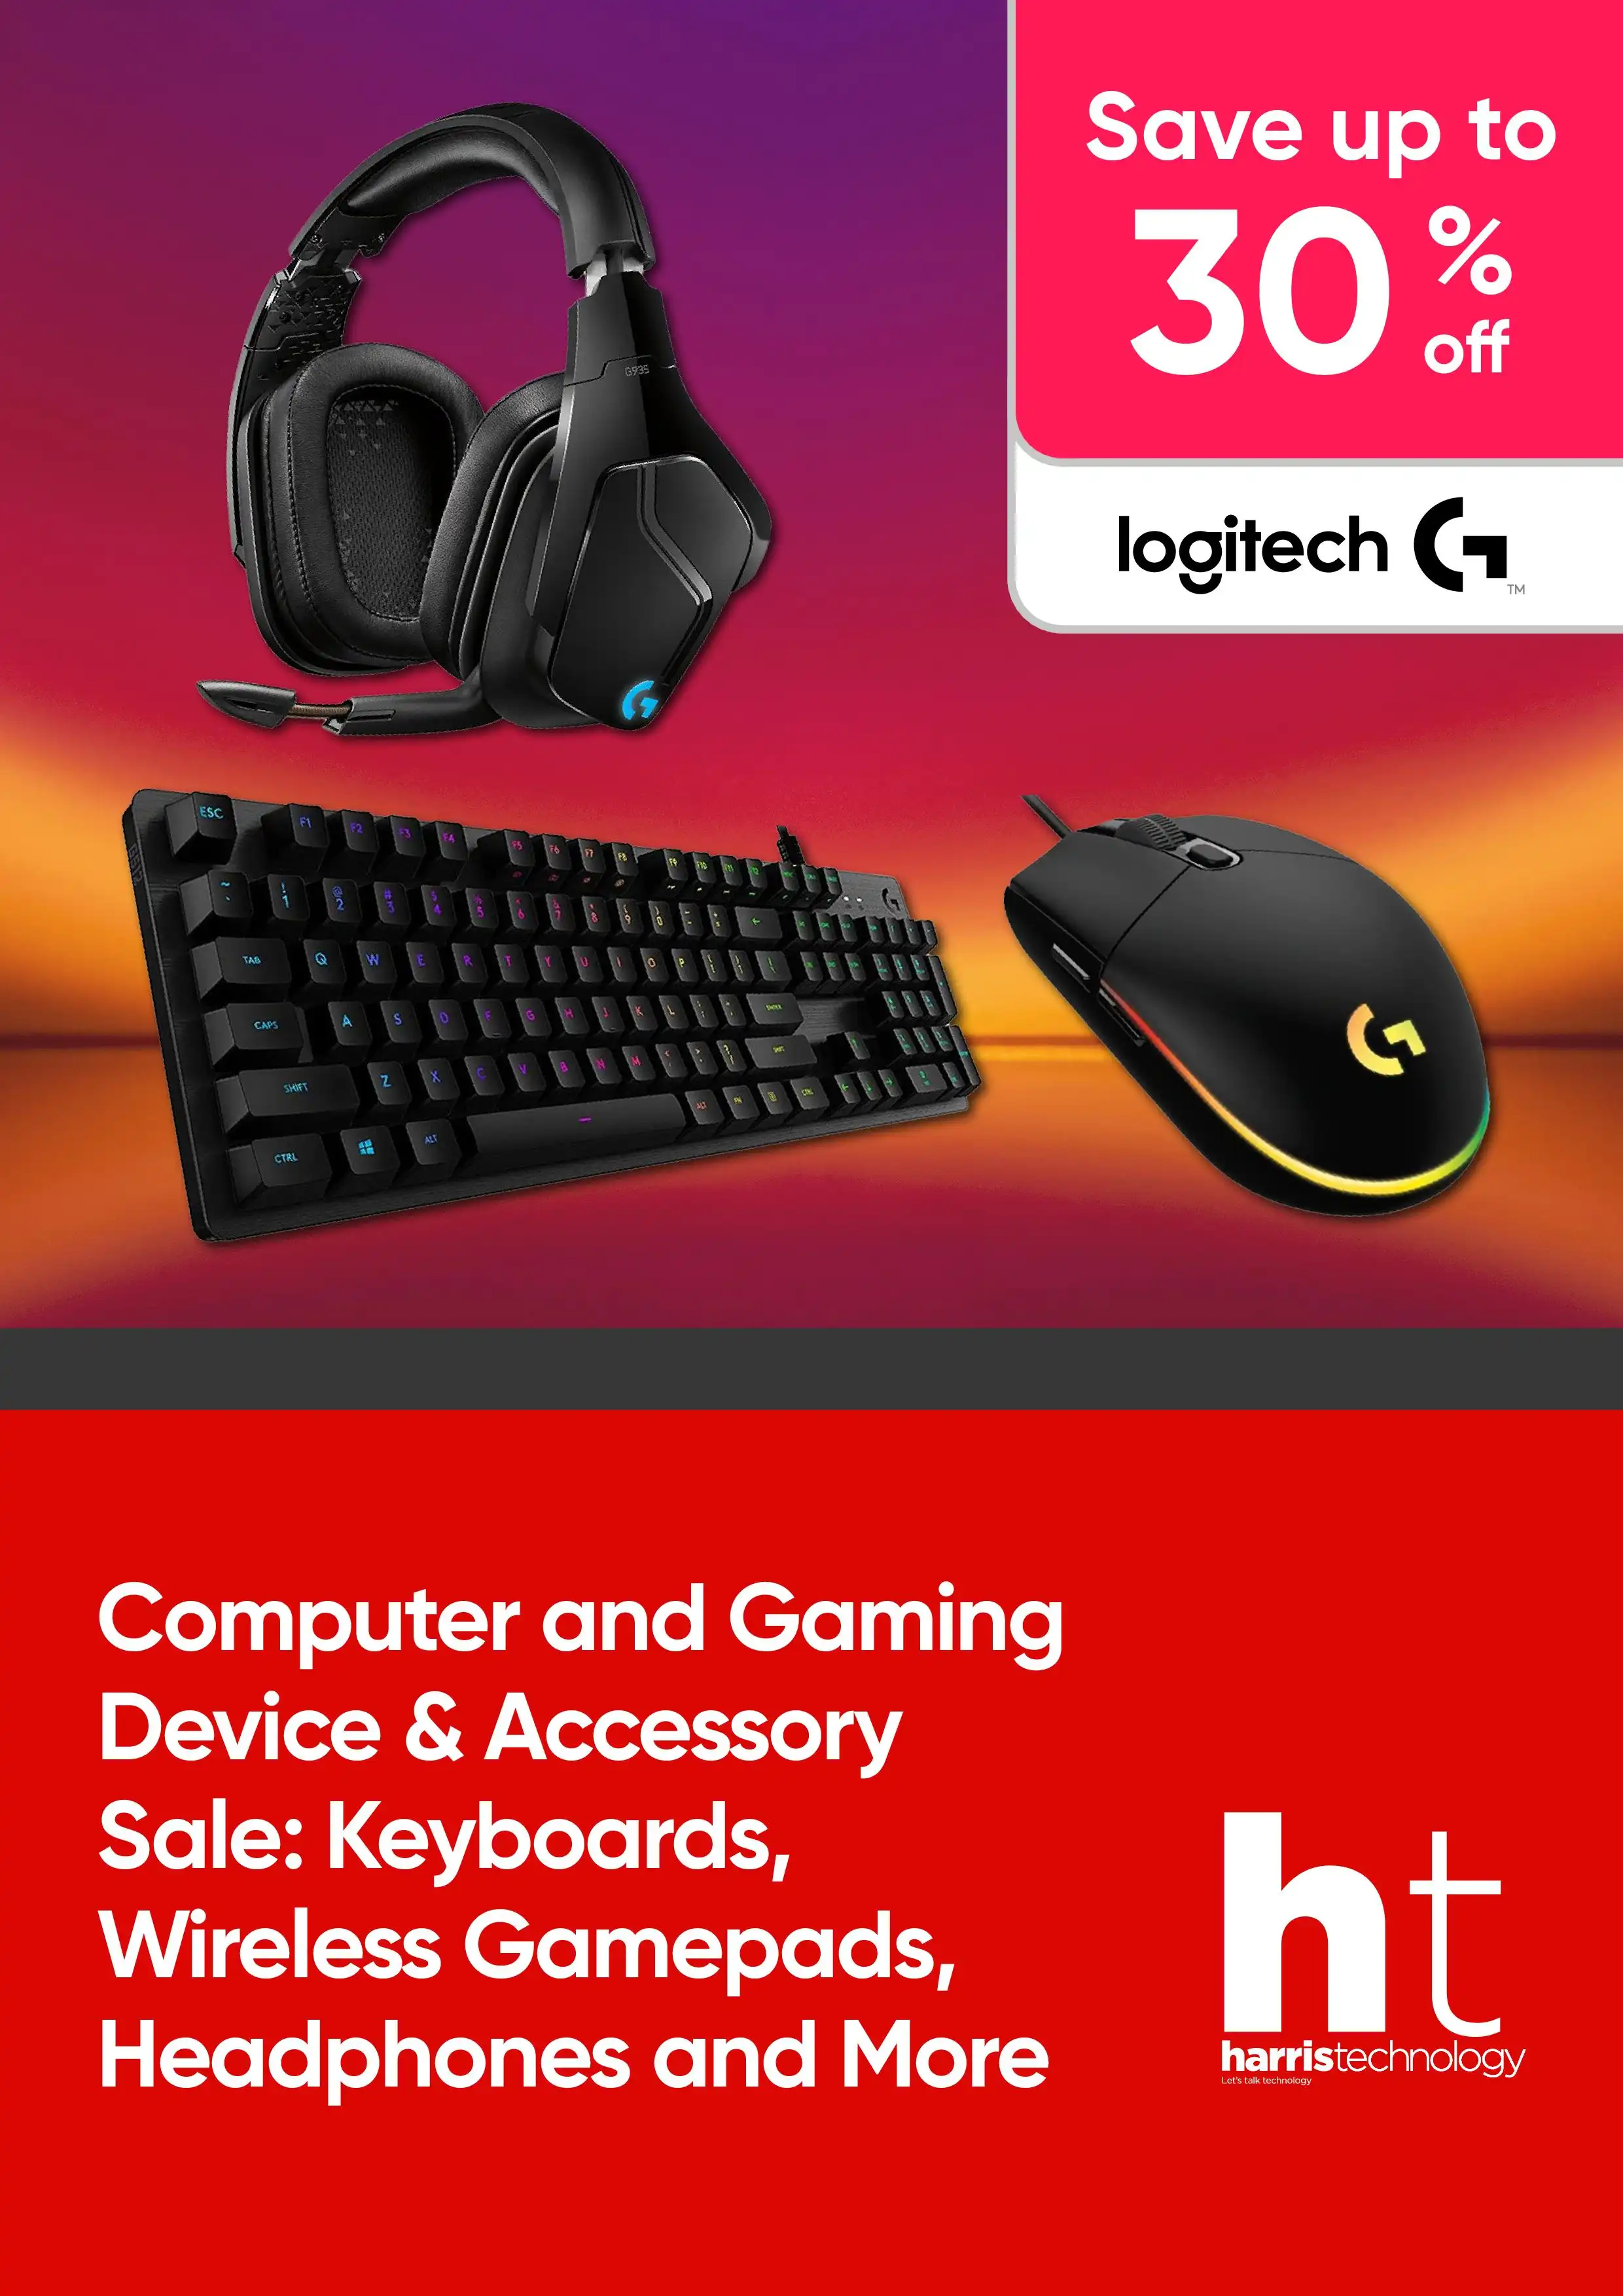 Computer Gaming Sale: Keyboards, Wireless Gamepads, Headphones and More – up to 30% off